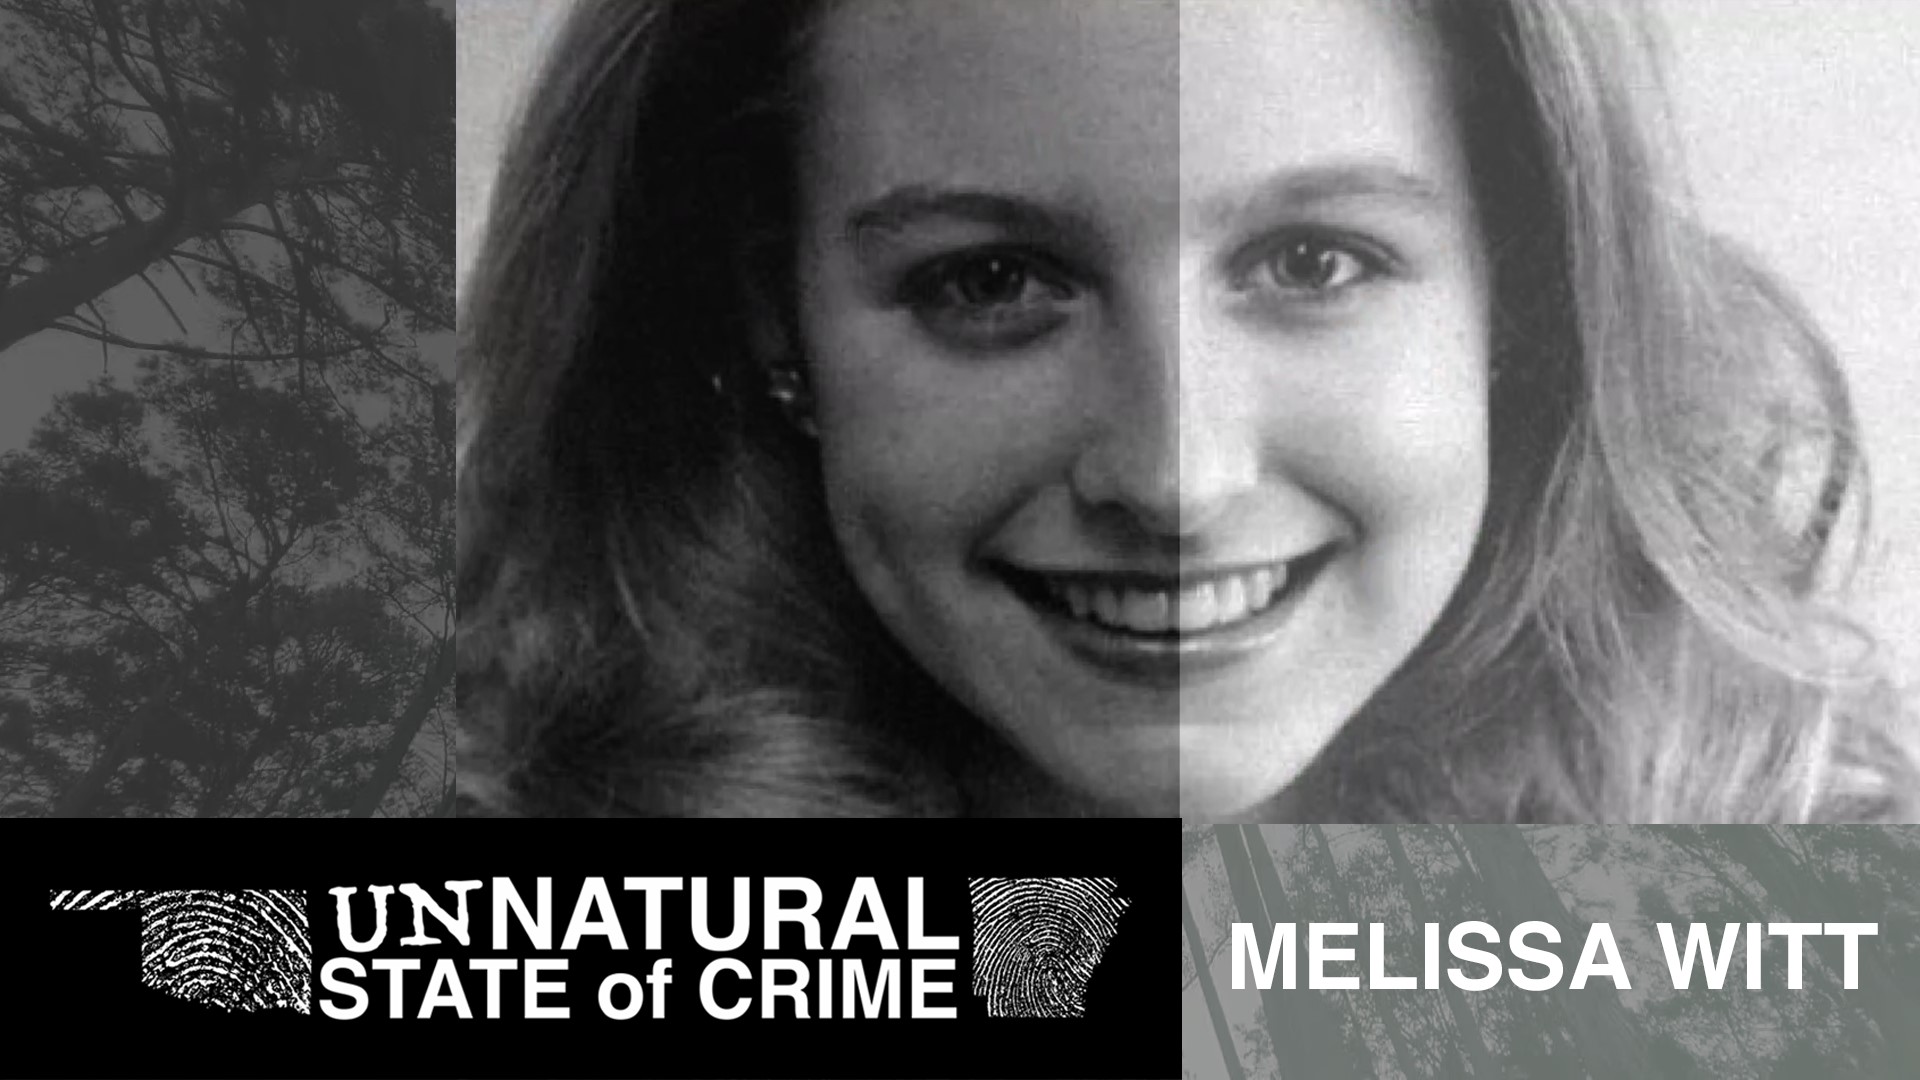 On Dec. 1, 1994, Melissa Witt vanished from a parking lot in Fort Smith. We took a deep dive into the case that's haunted the town for nearly 30 years later.